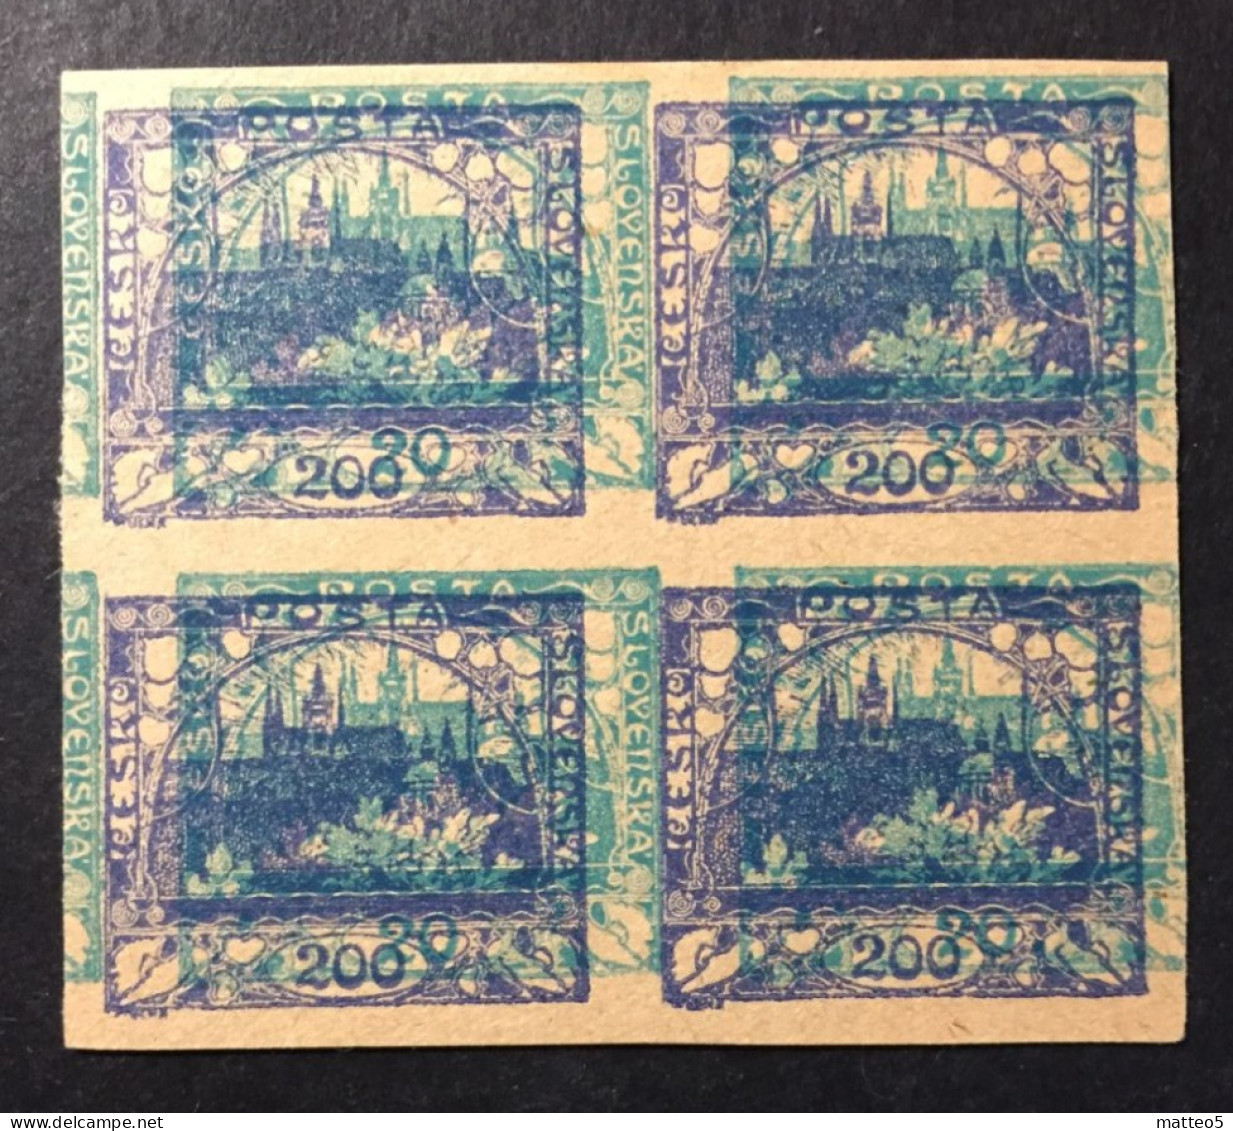 1919  Czechoslovakia - Hradcany At Castle- Prague Castle - Variety, Double Color Printing - Unused ( Mint Hinged ) - Unused Stamps